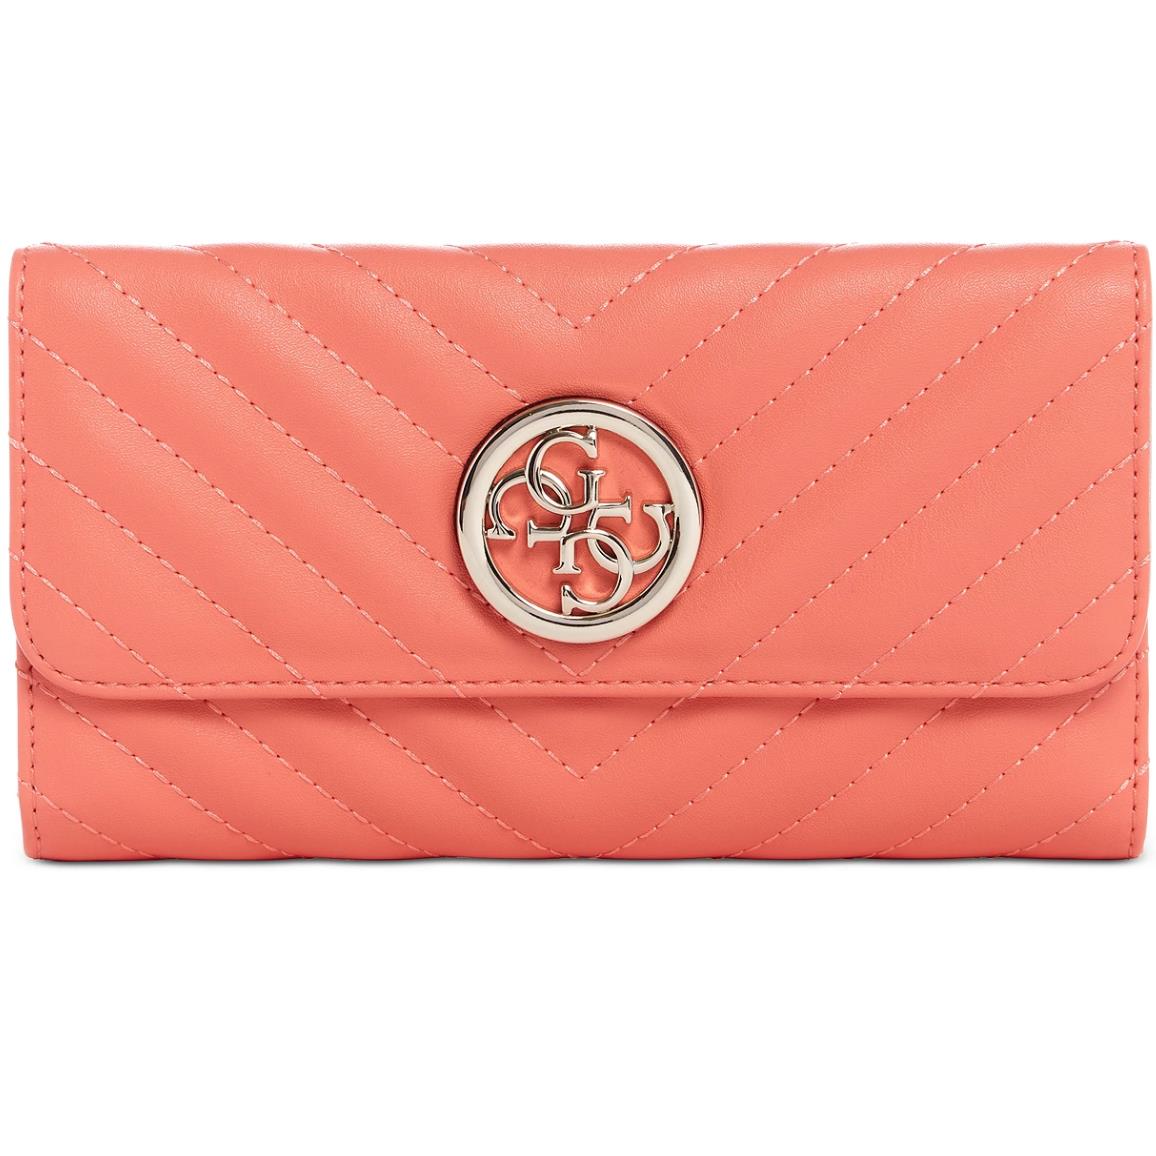 Guess Womens Coral Blakely Clutch Wallet 32410